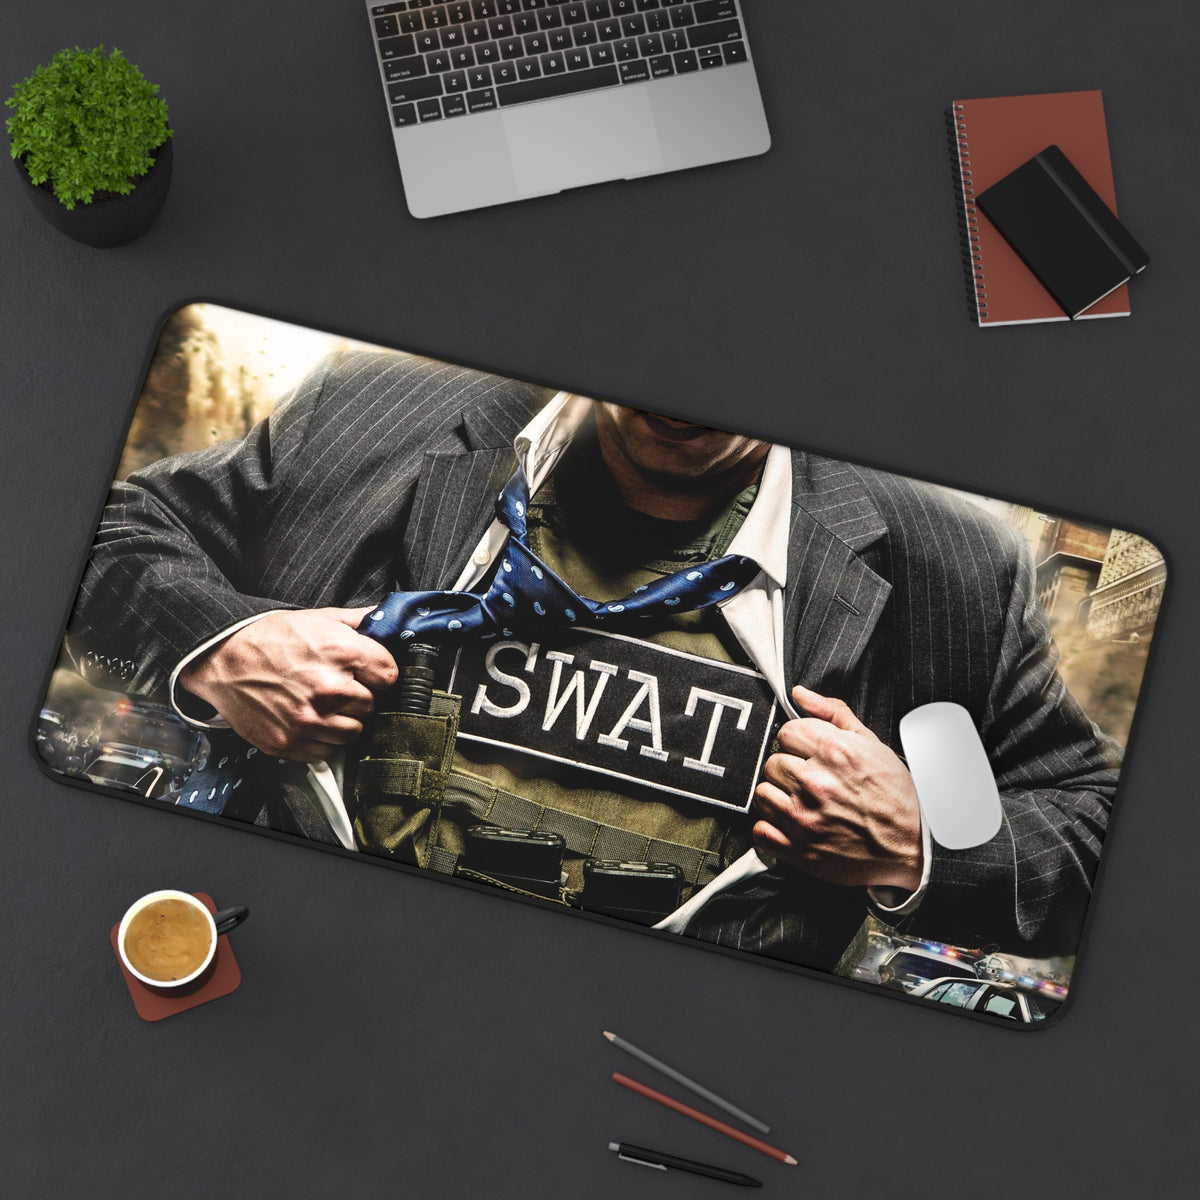 Answering the Call Swat Desk Mat